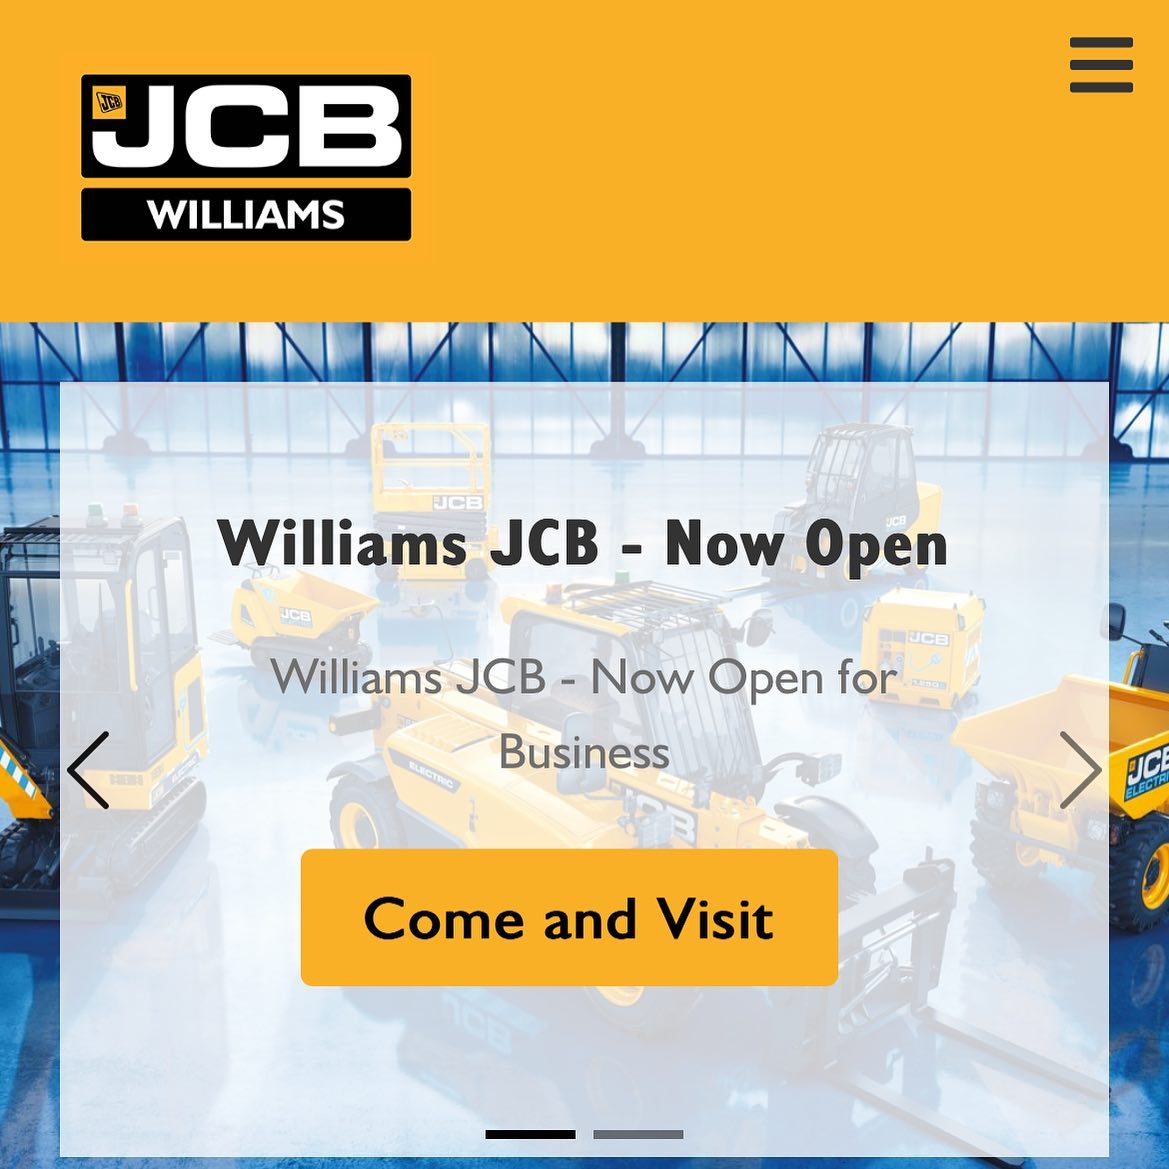 Our website is now live! Visit www.williamsjcb.com to view our wide range of equipment. From telehandlers to skid steers and excavators, we have the right machinery for your job!
#williamsjcb #jcb #jcbequipment